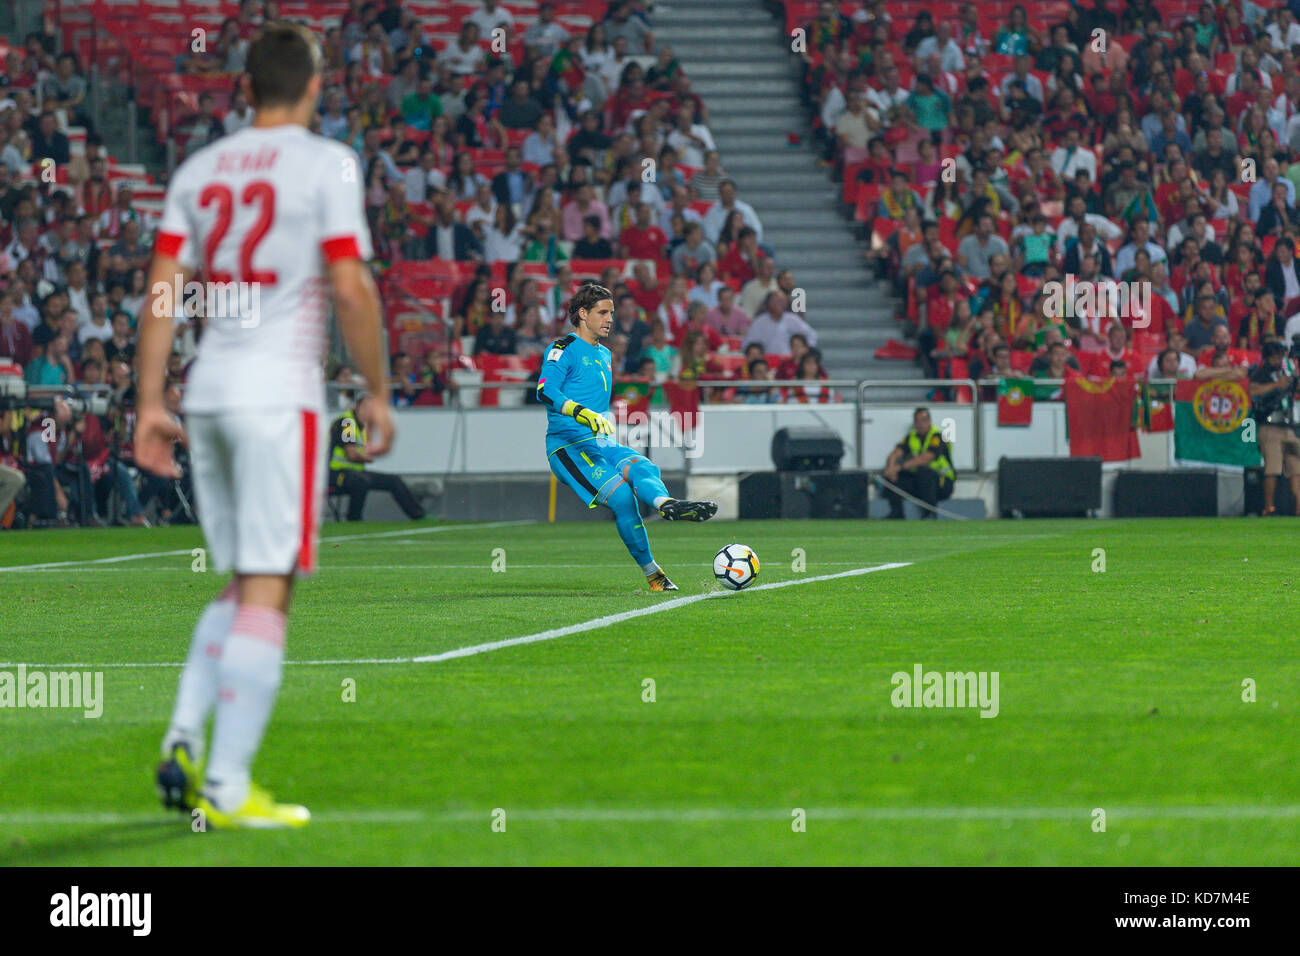 Lisbon, Portugal. 10th Oct, 2017. Switzerland's goalkeeper Yann Sommer (1) during the FIFA 2018 World Cup Qualifier between Portugal and Switzerland Credit: Alexandre de Sousa/Alamy Live News Stock Photo